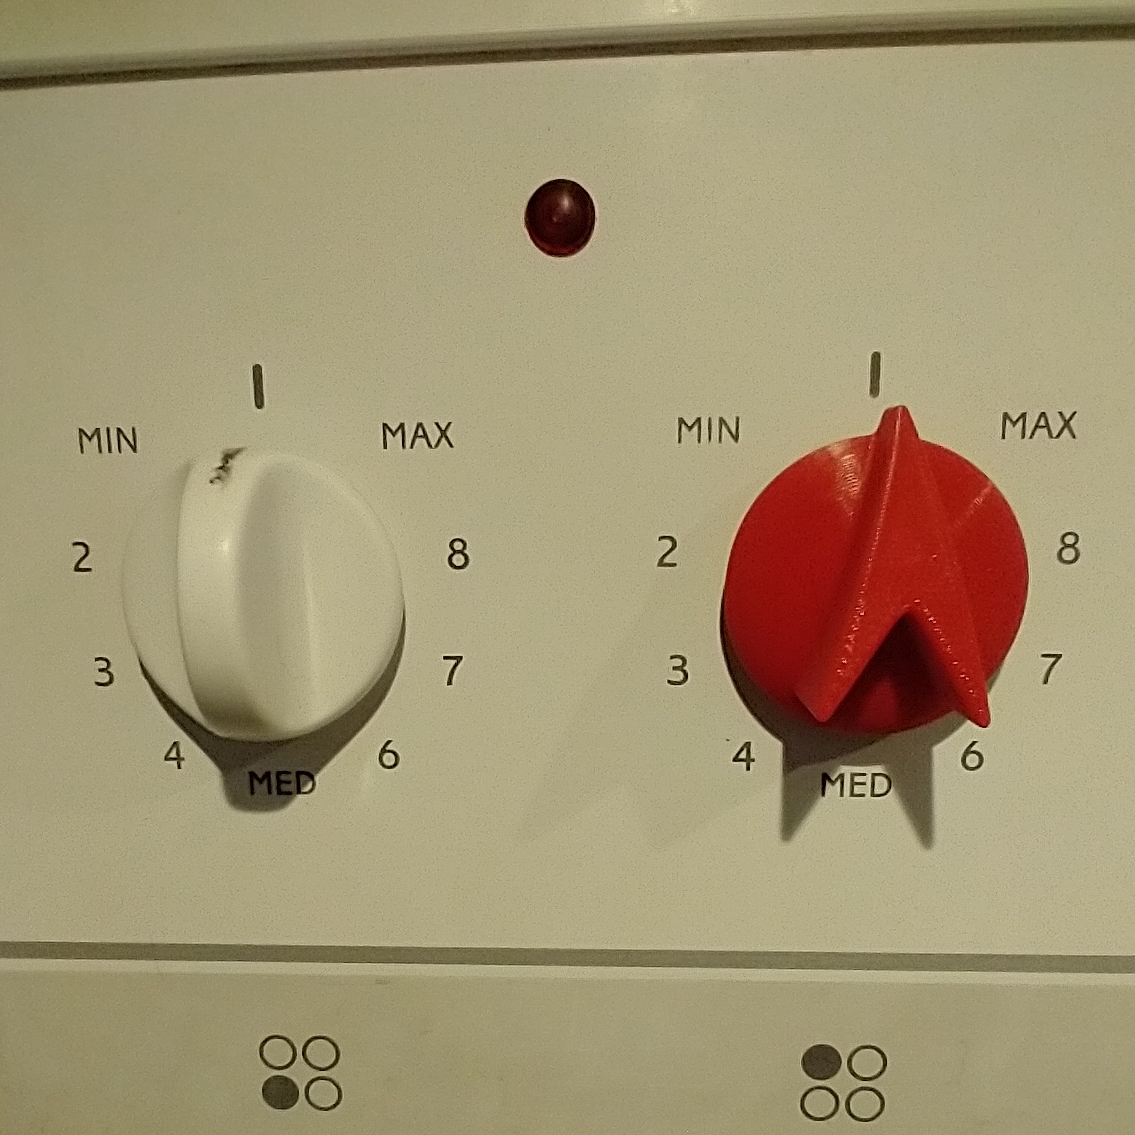 The panel of a stove with two knobs. On the left, a white knob has a vertical tab. There is a ragged black indicator line drawn on the top of the tab.. On the left, the red tab has an arrowhead profile with a clear indication of position.